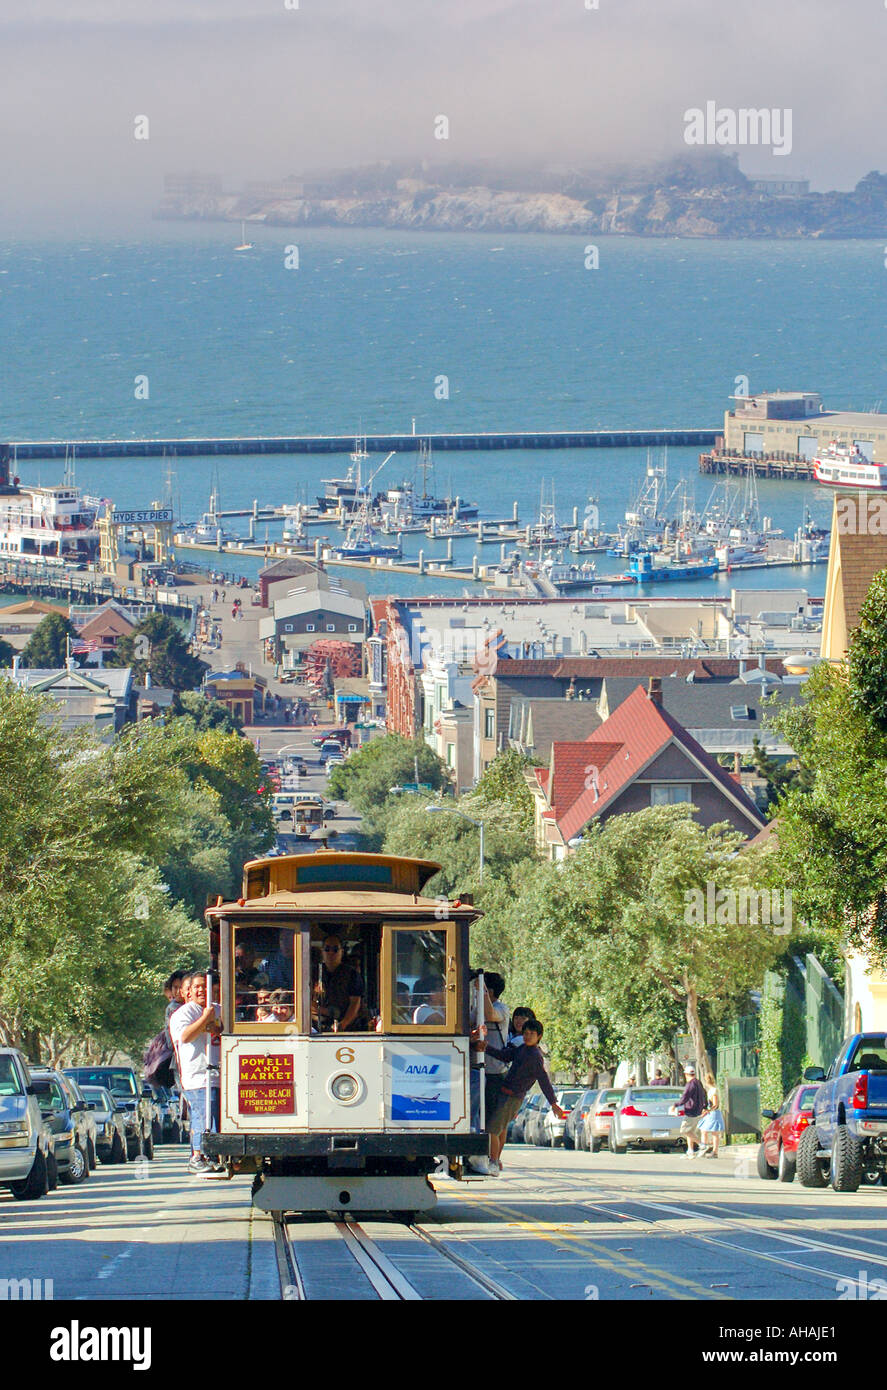 A San Francisco cable car climbs the hill with Alcatraz in the background Stock Photo